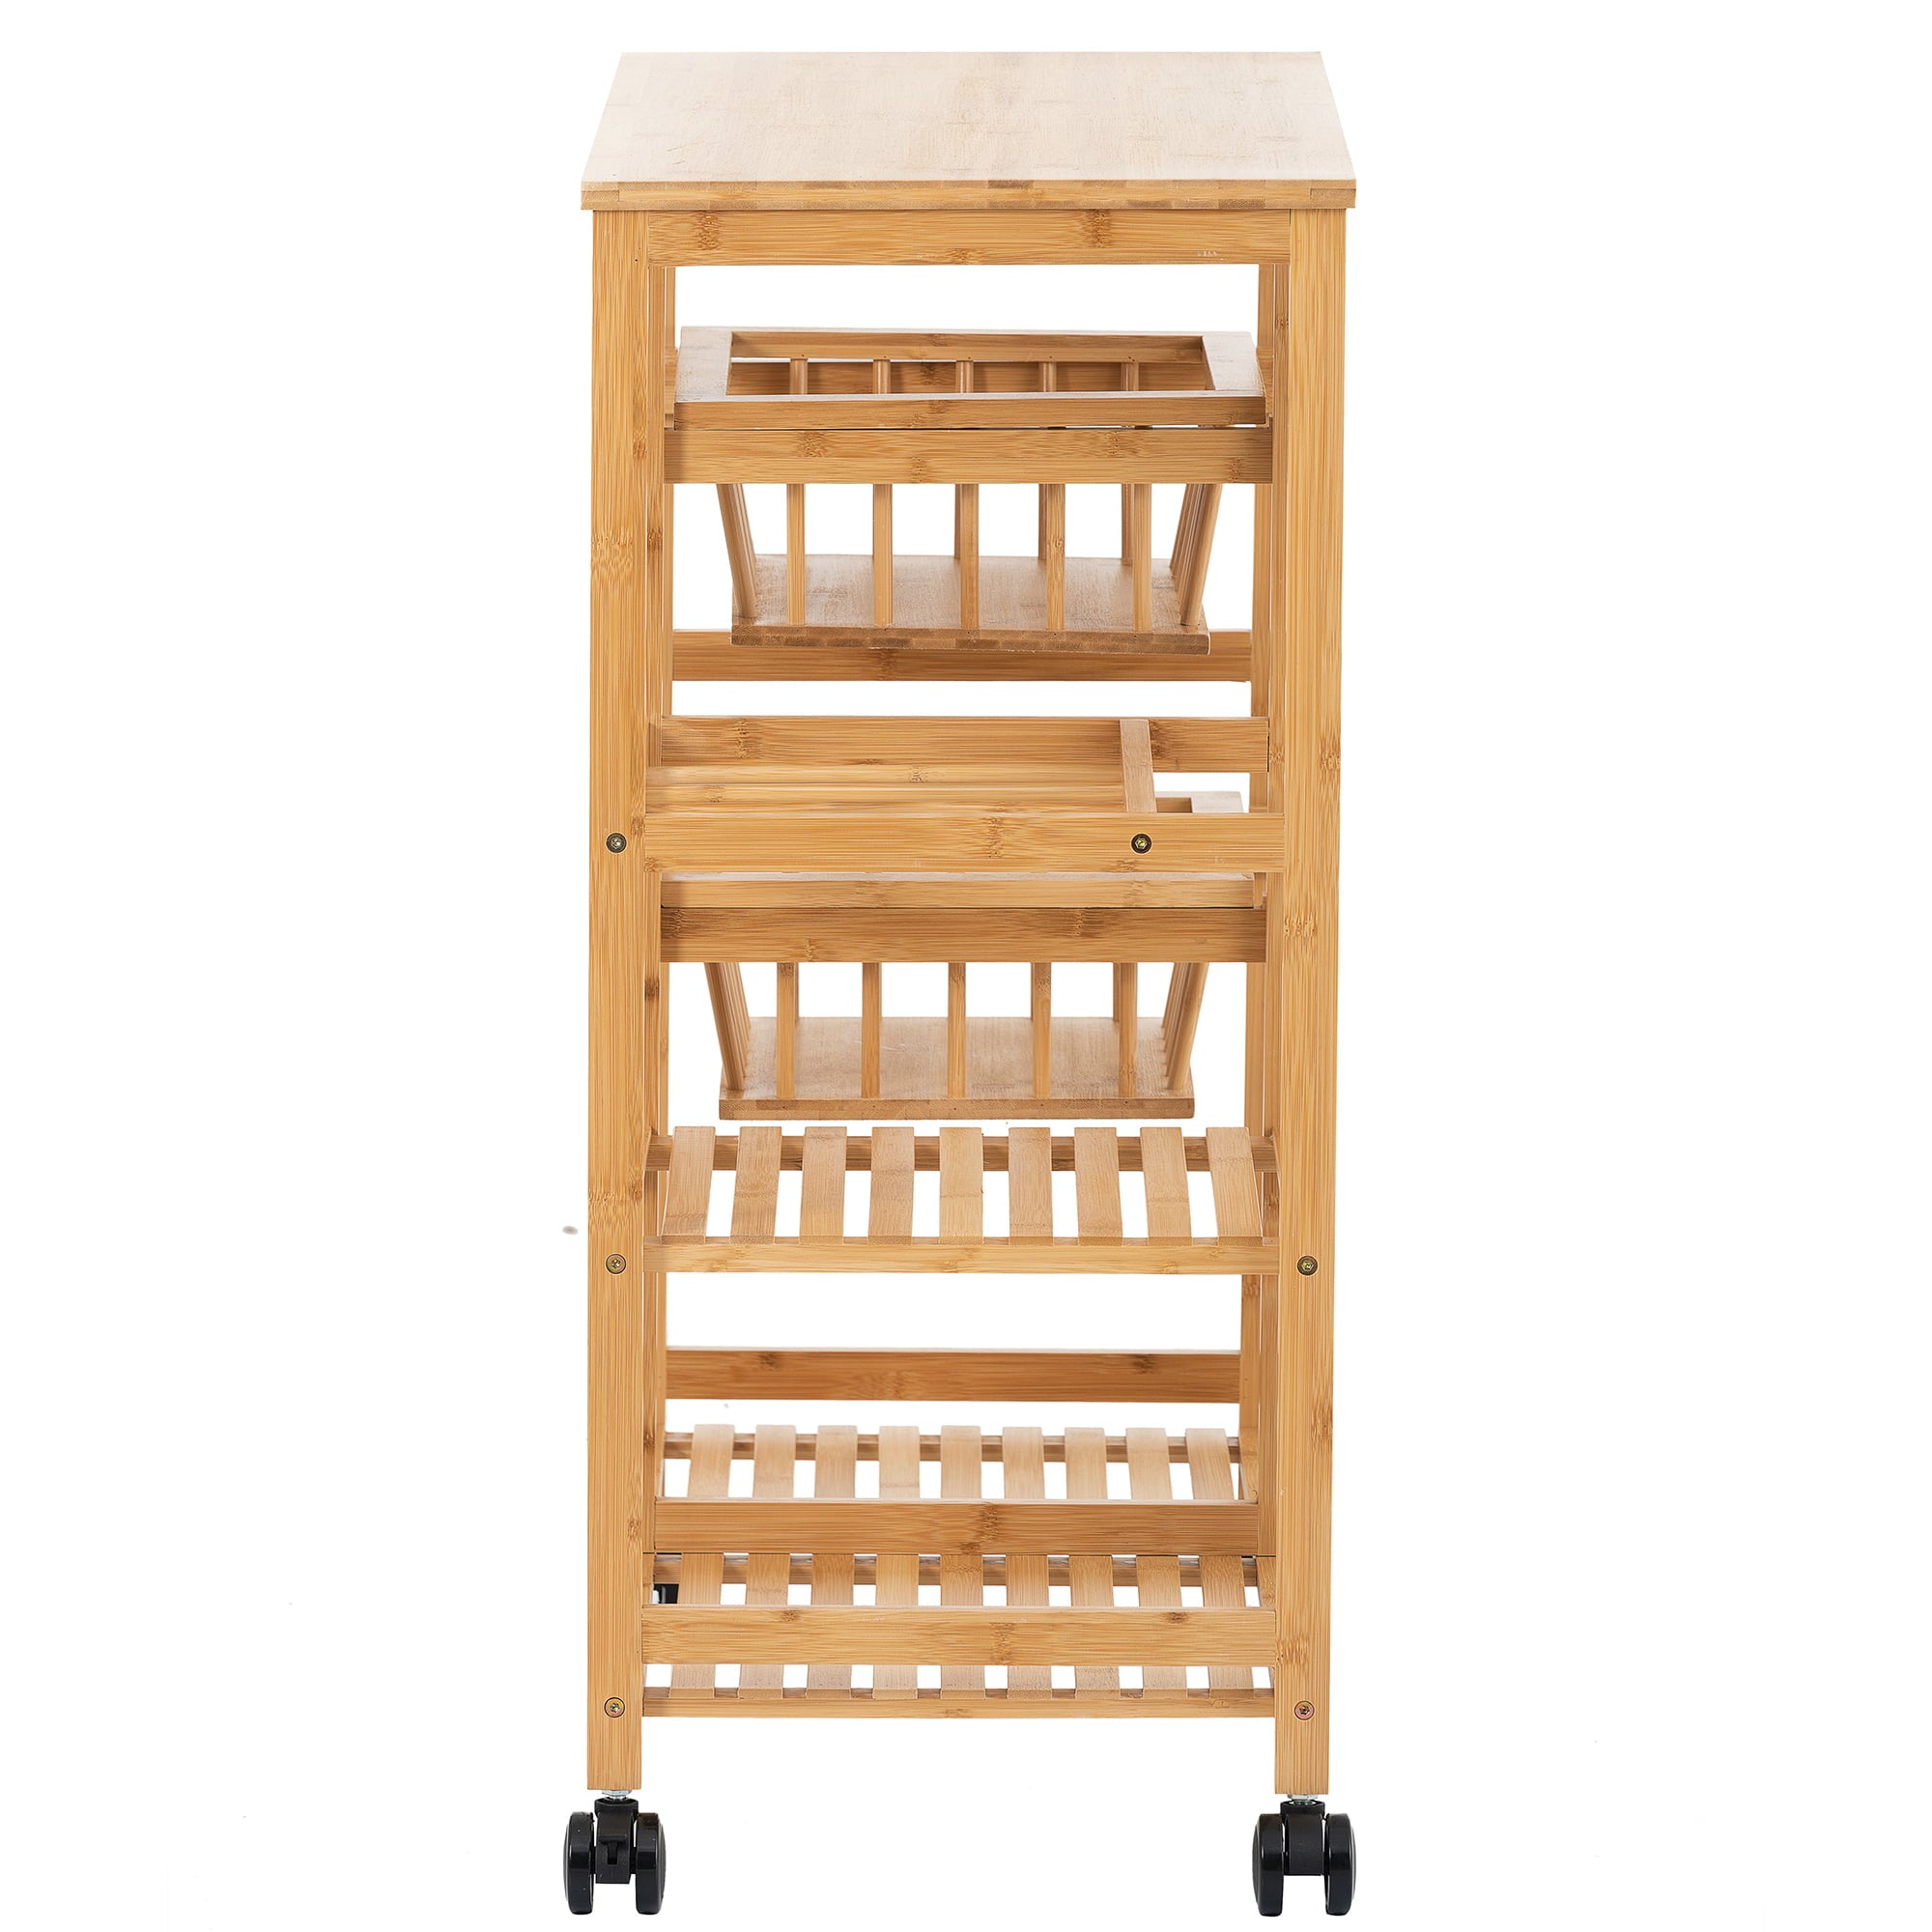 uhomepro Kitchen Rolling Microwave Cart on Wheels， Microwave Oven Stand Storage Cart on Wheels， Mobile Kitchen Cart， Bamboo Food Pantry Carts with Wine Rack， 3 Shelves， 2 Baskets